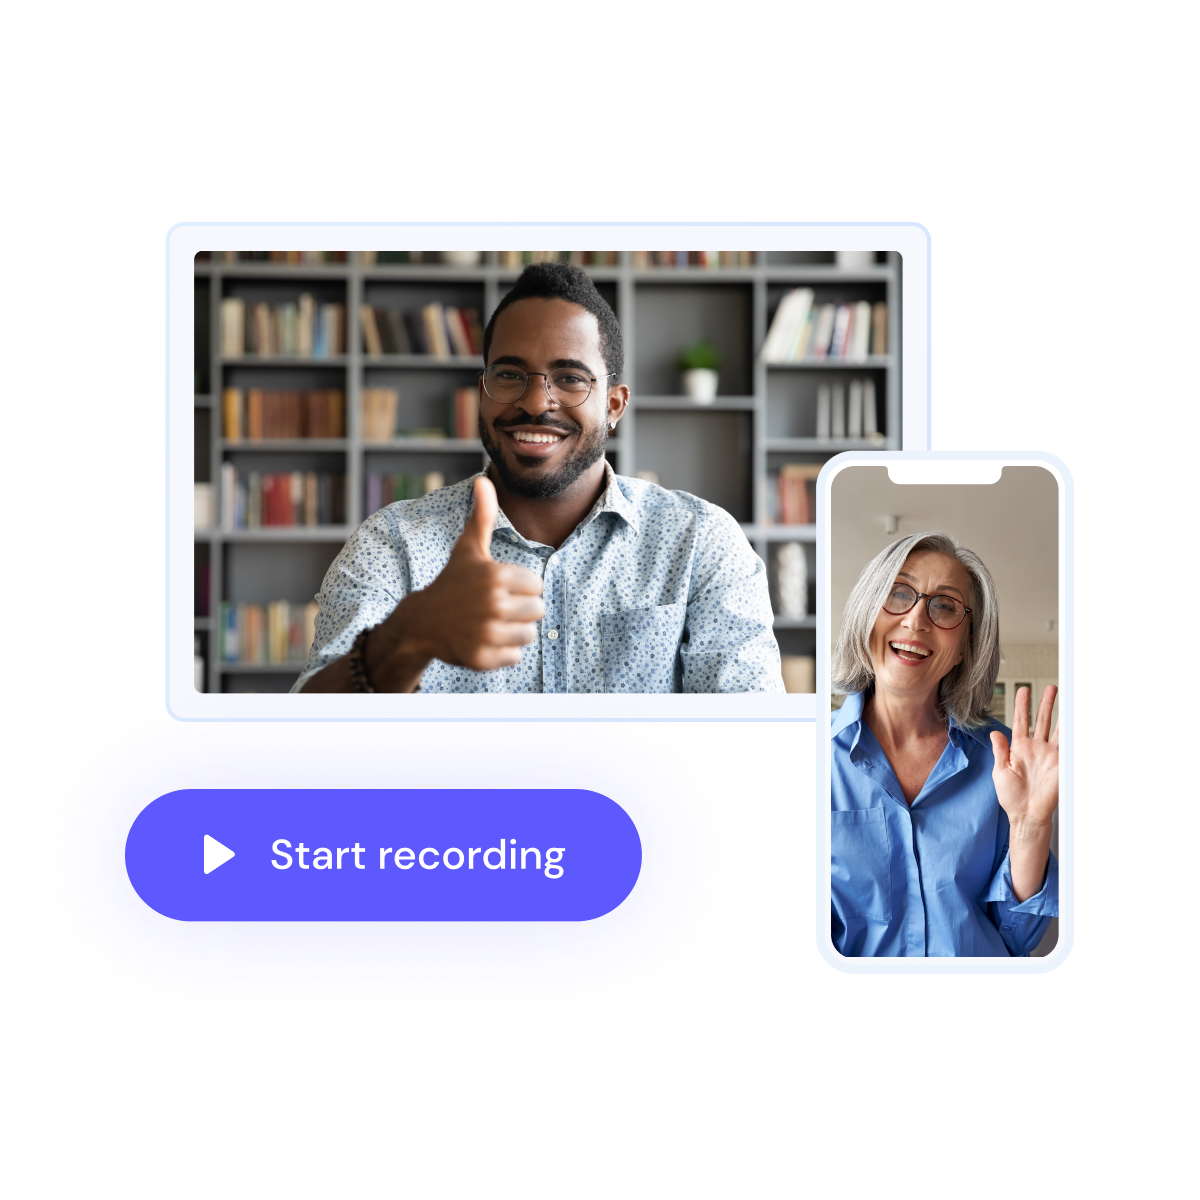 A smiling man gives a thumbs-up in a video call interface with a woman waving hello, accompanied by a "start recording" button.